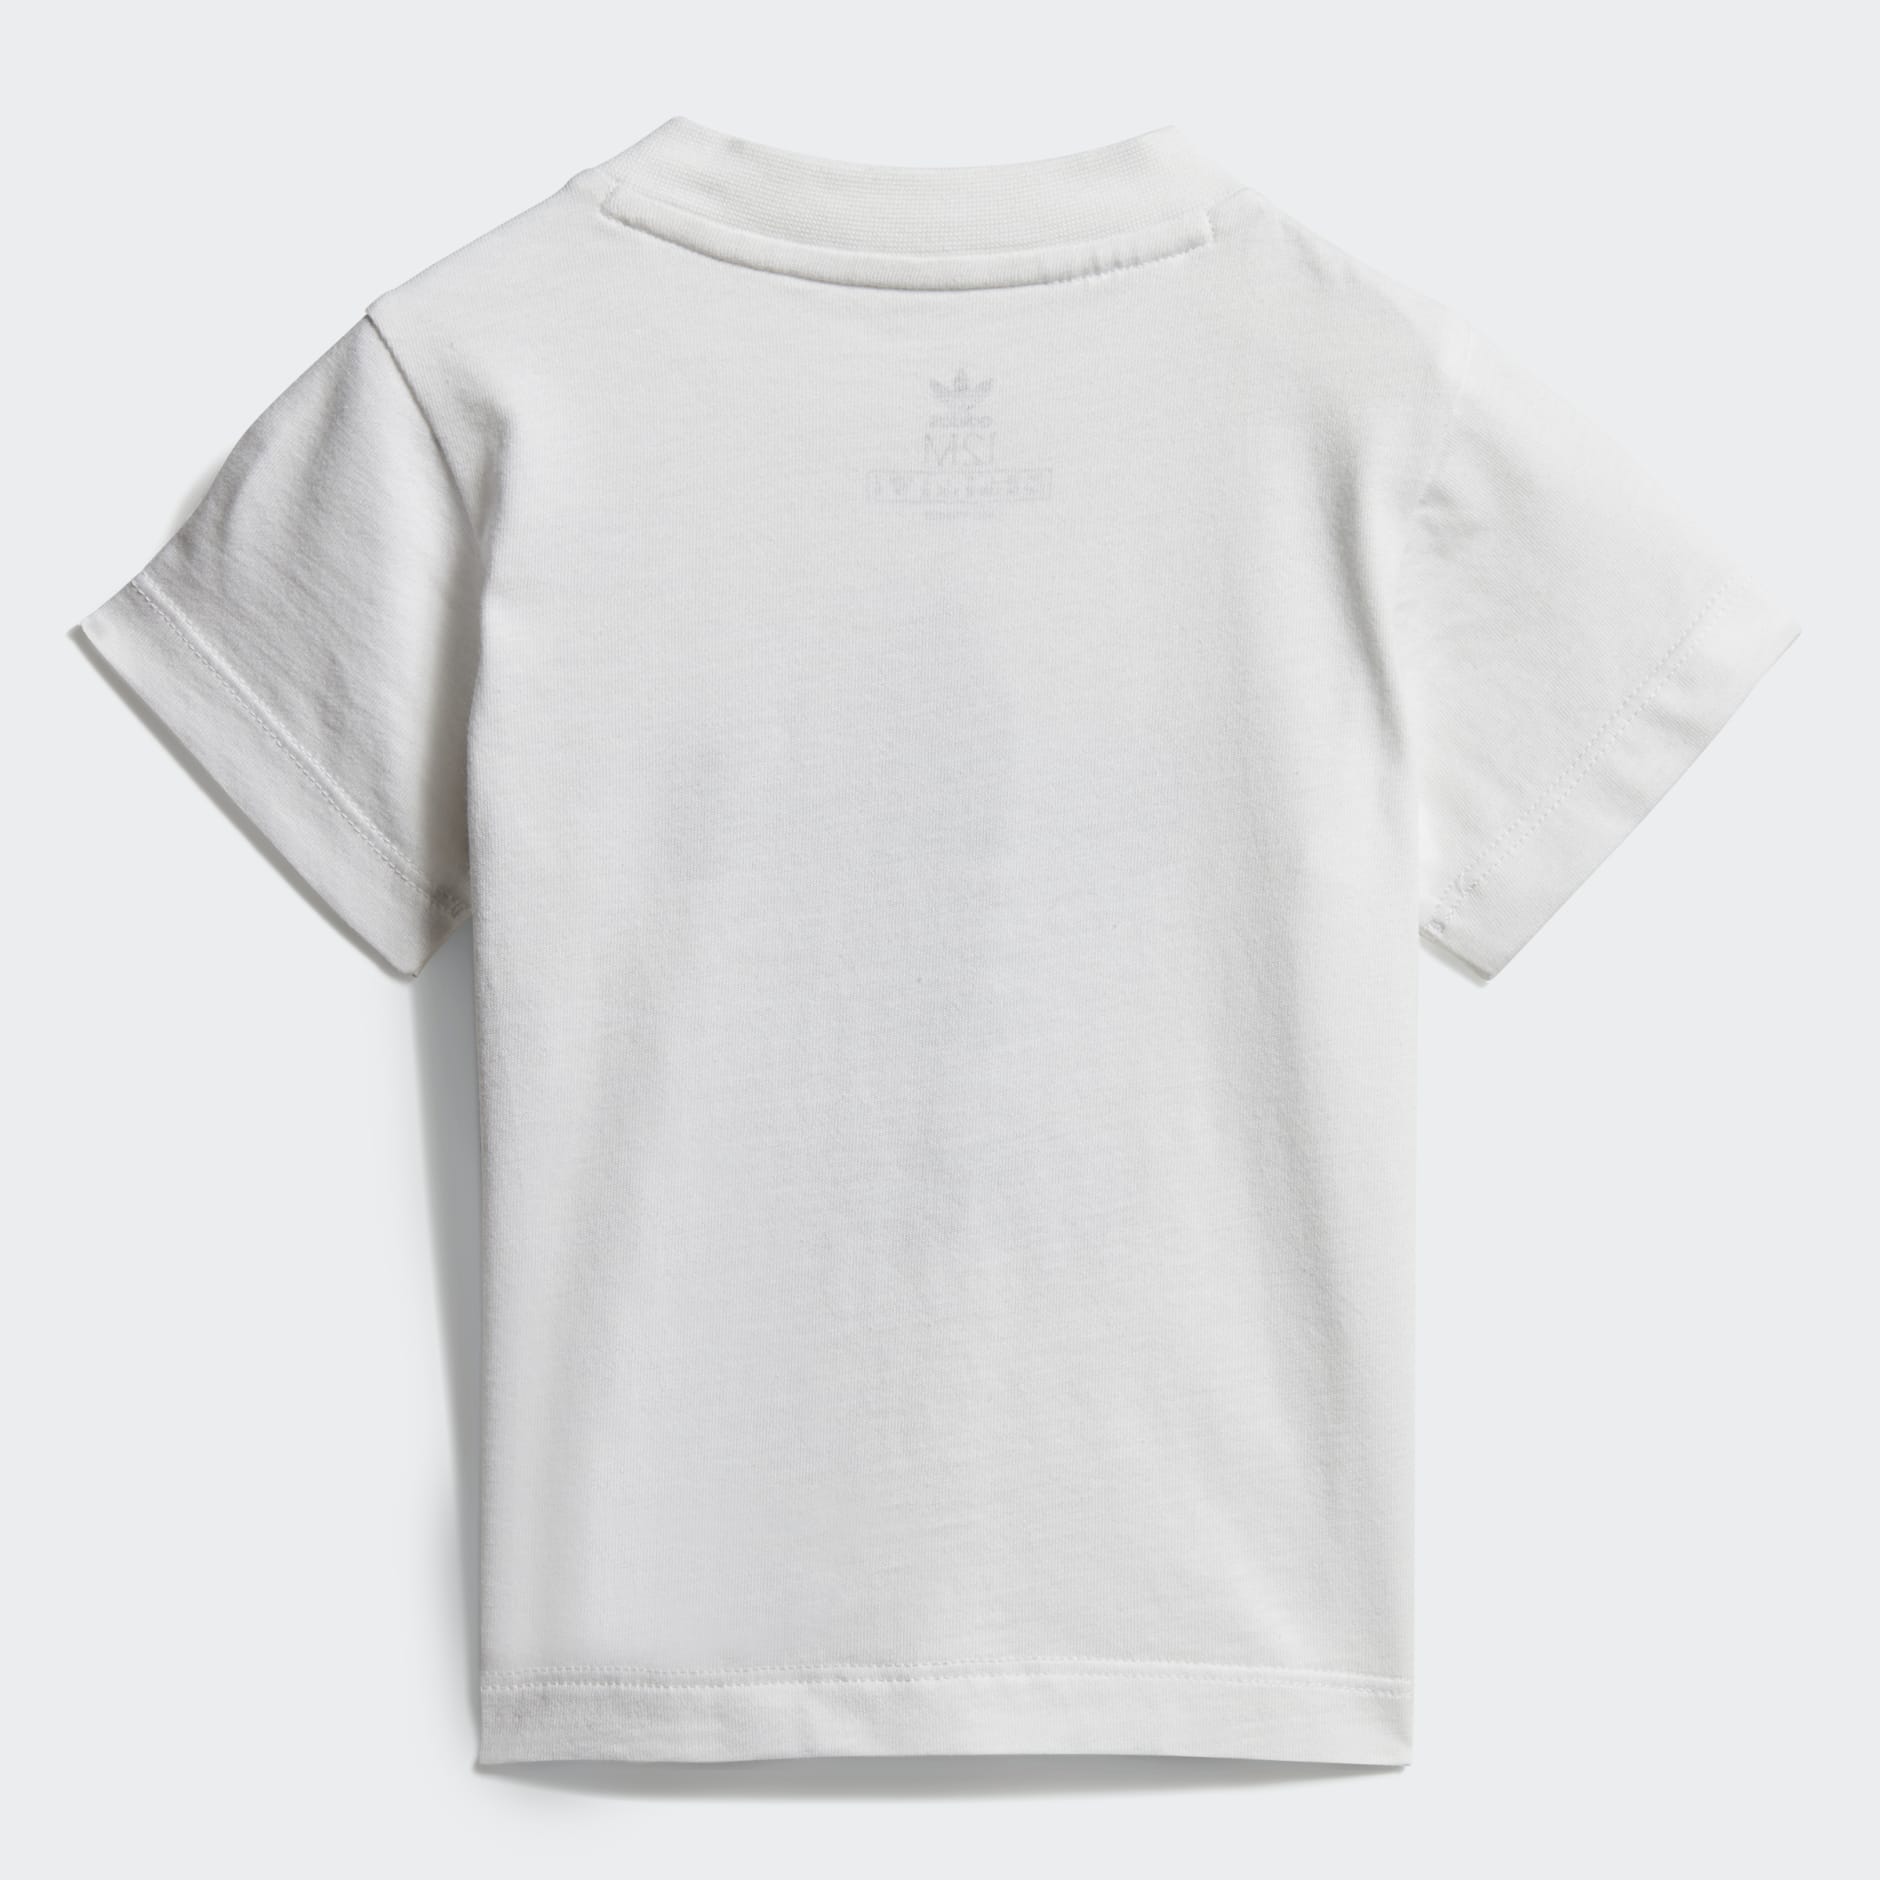 Clothing - Trefoil Tee - White | adidas South Africa